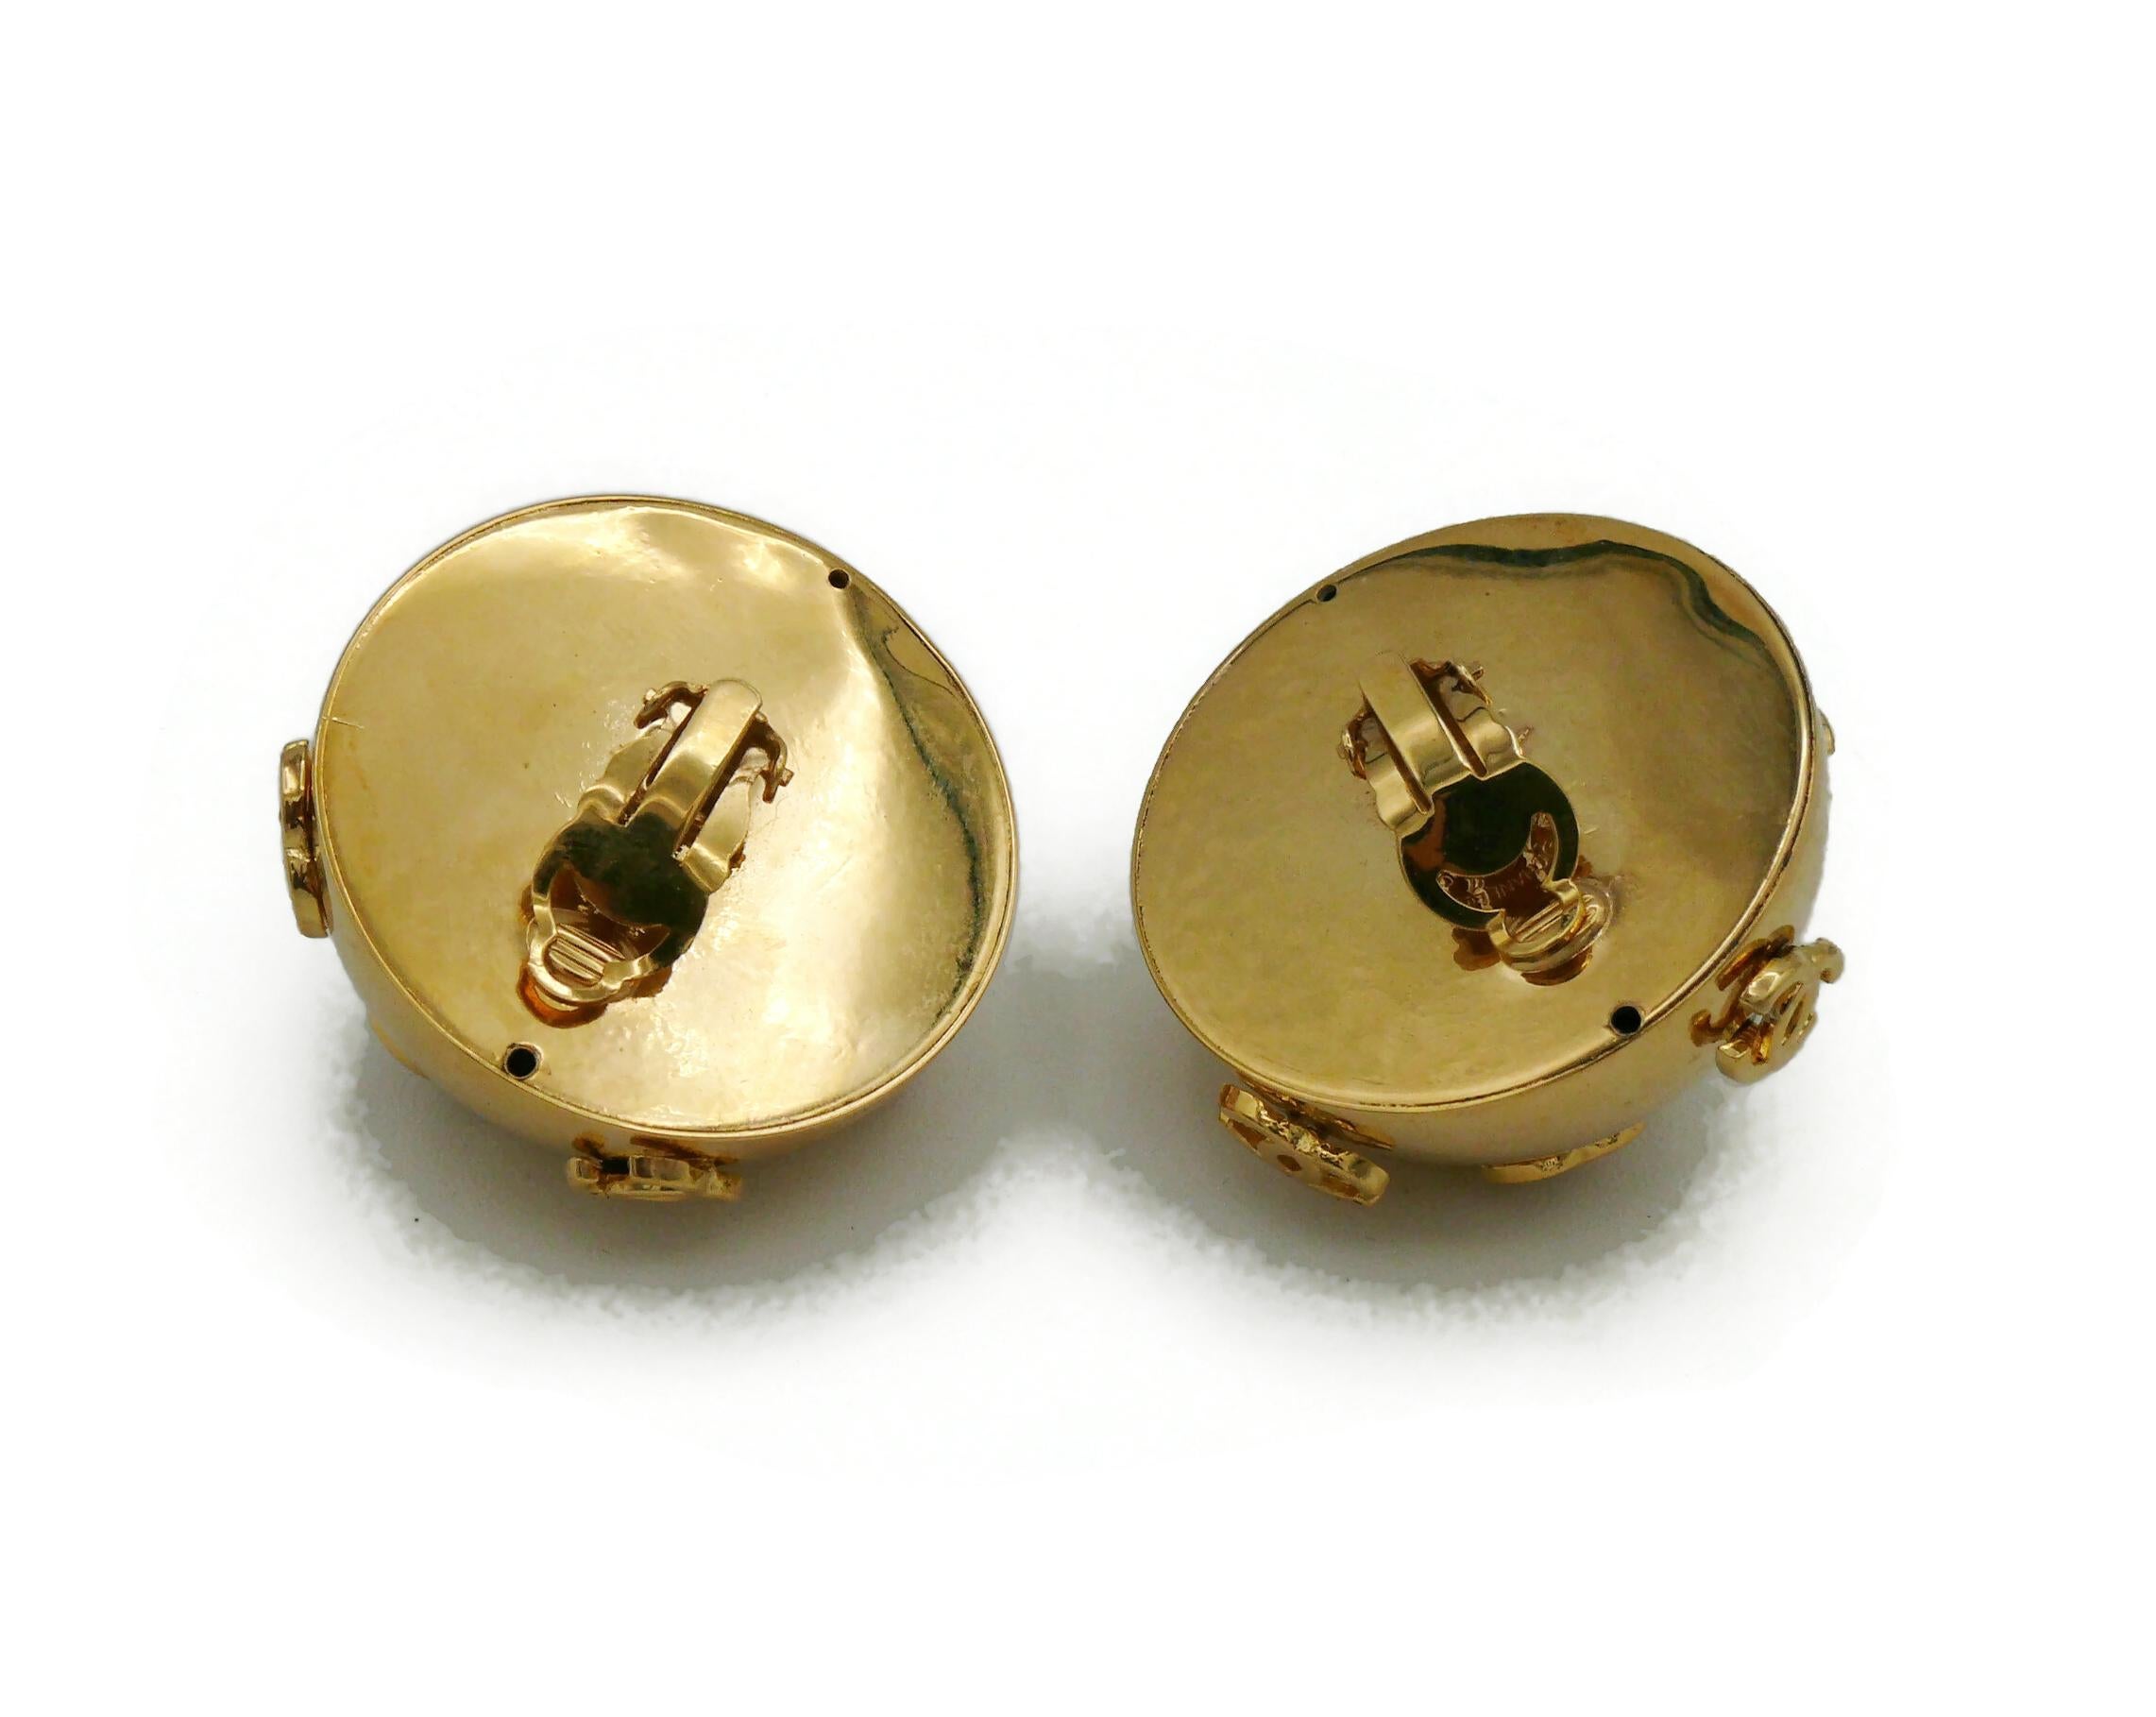 CHANEL by KARL LAGERFELD Vintage Oversized Dome CC Logos Clip-On Earrings, 1992 For Sale 2